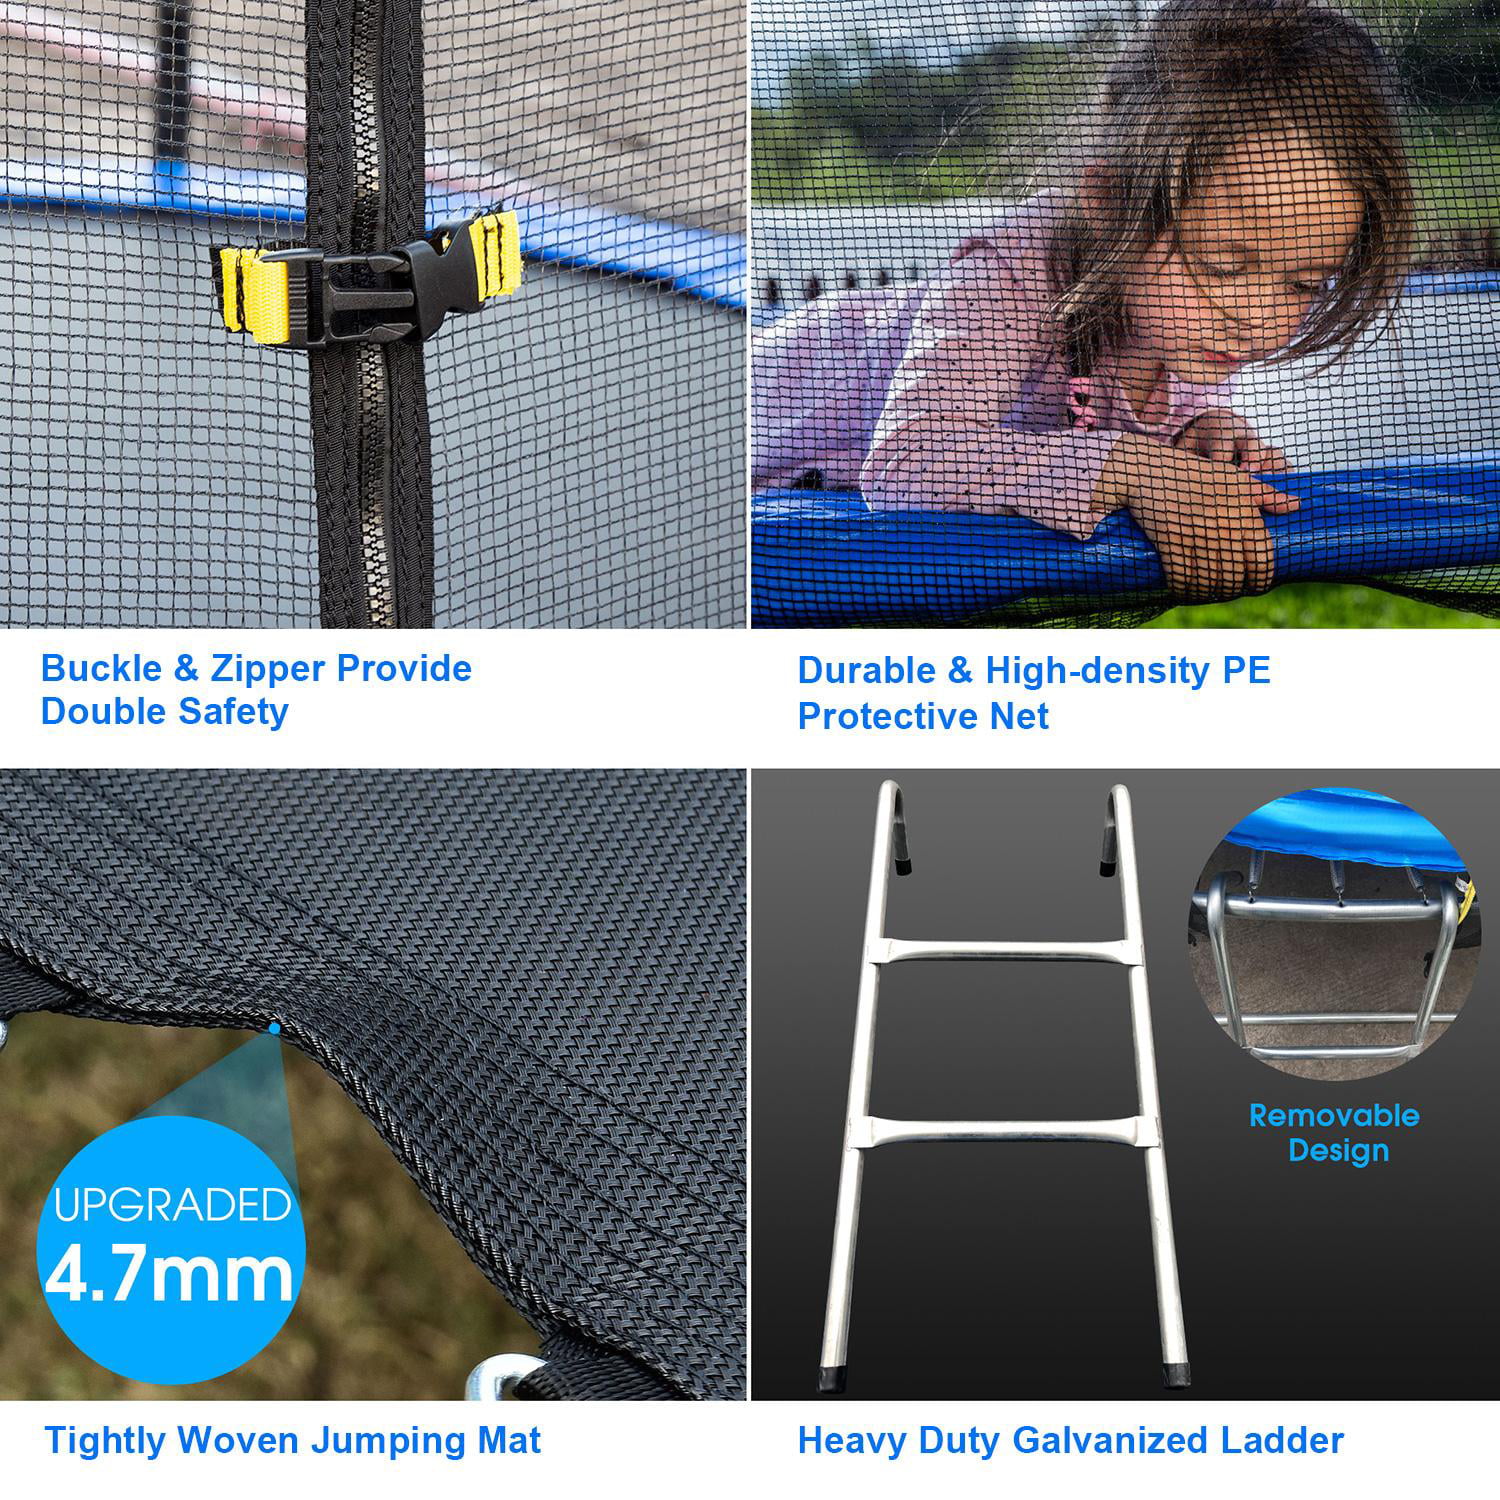 Delivered in 7 days Vssictor Barrel Trampoline Sturdy Durable with Safety Enclosure Netting and Ladder For Kids and Children Indoor Outdoor 8ft Premium Bounce Trampoline 